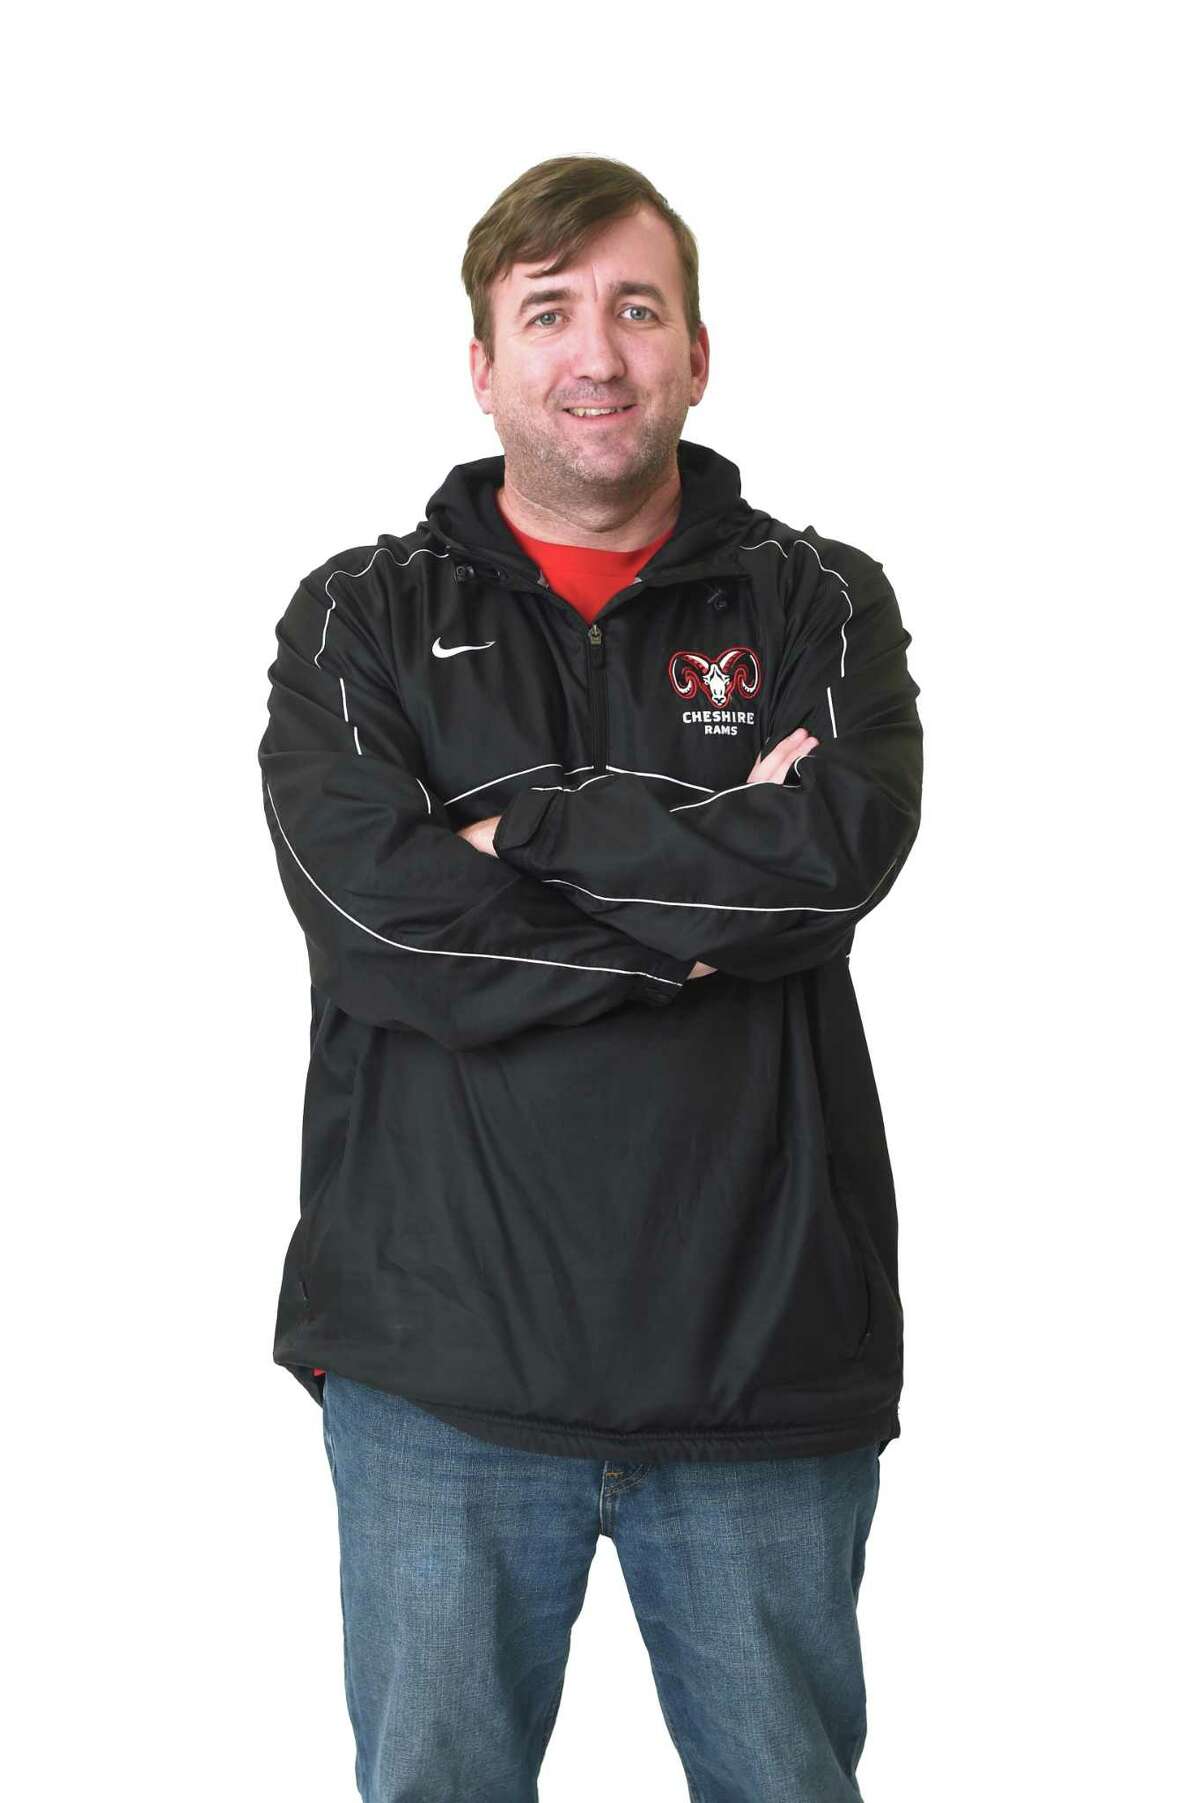 Cheshire boys swimming coach Kevin Reeder.